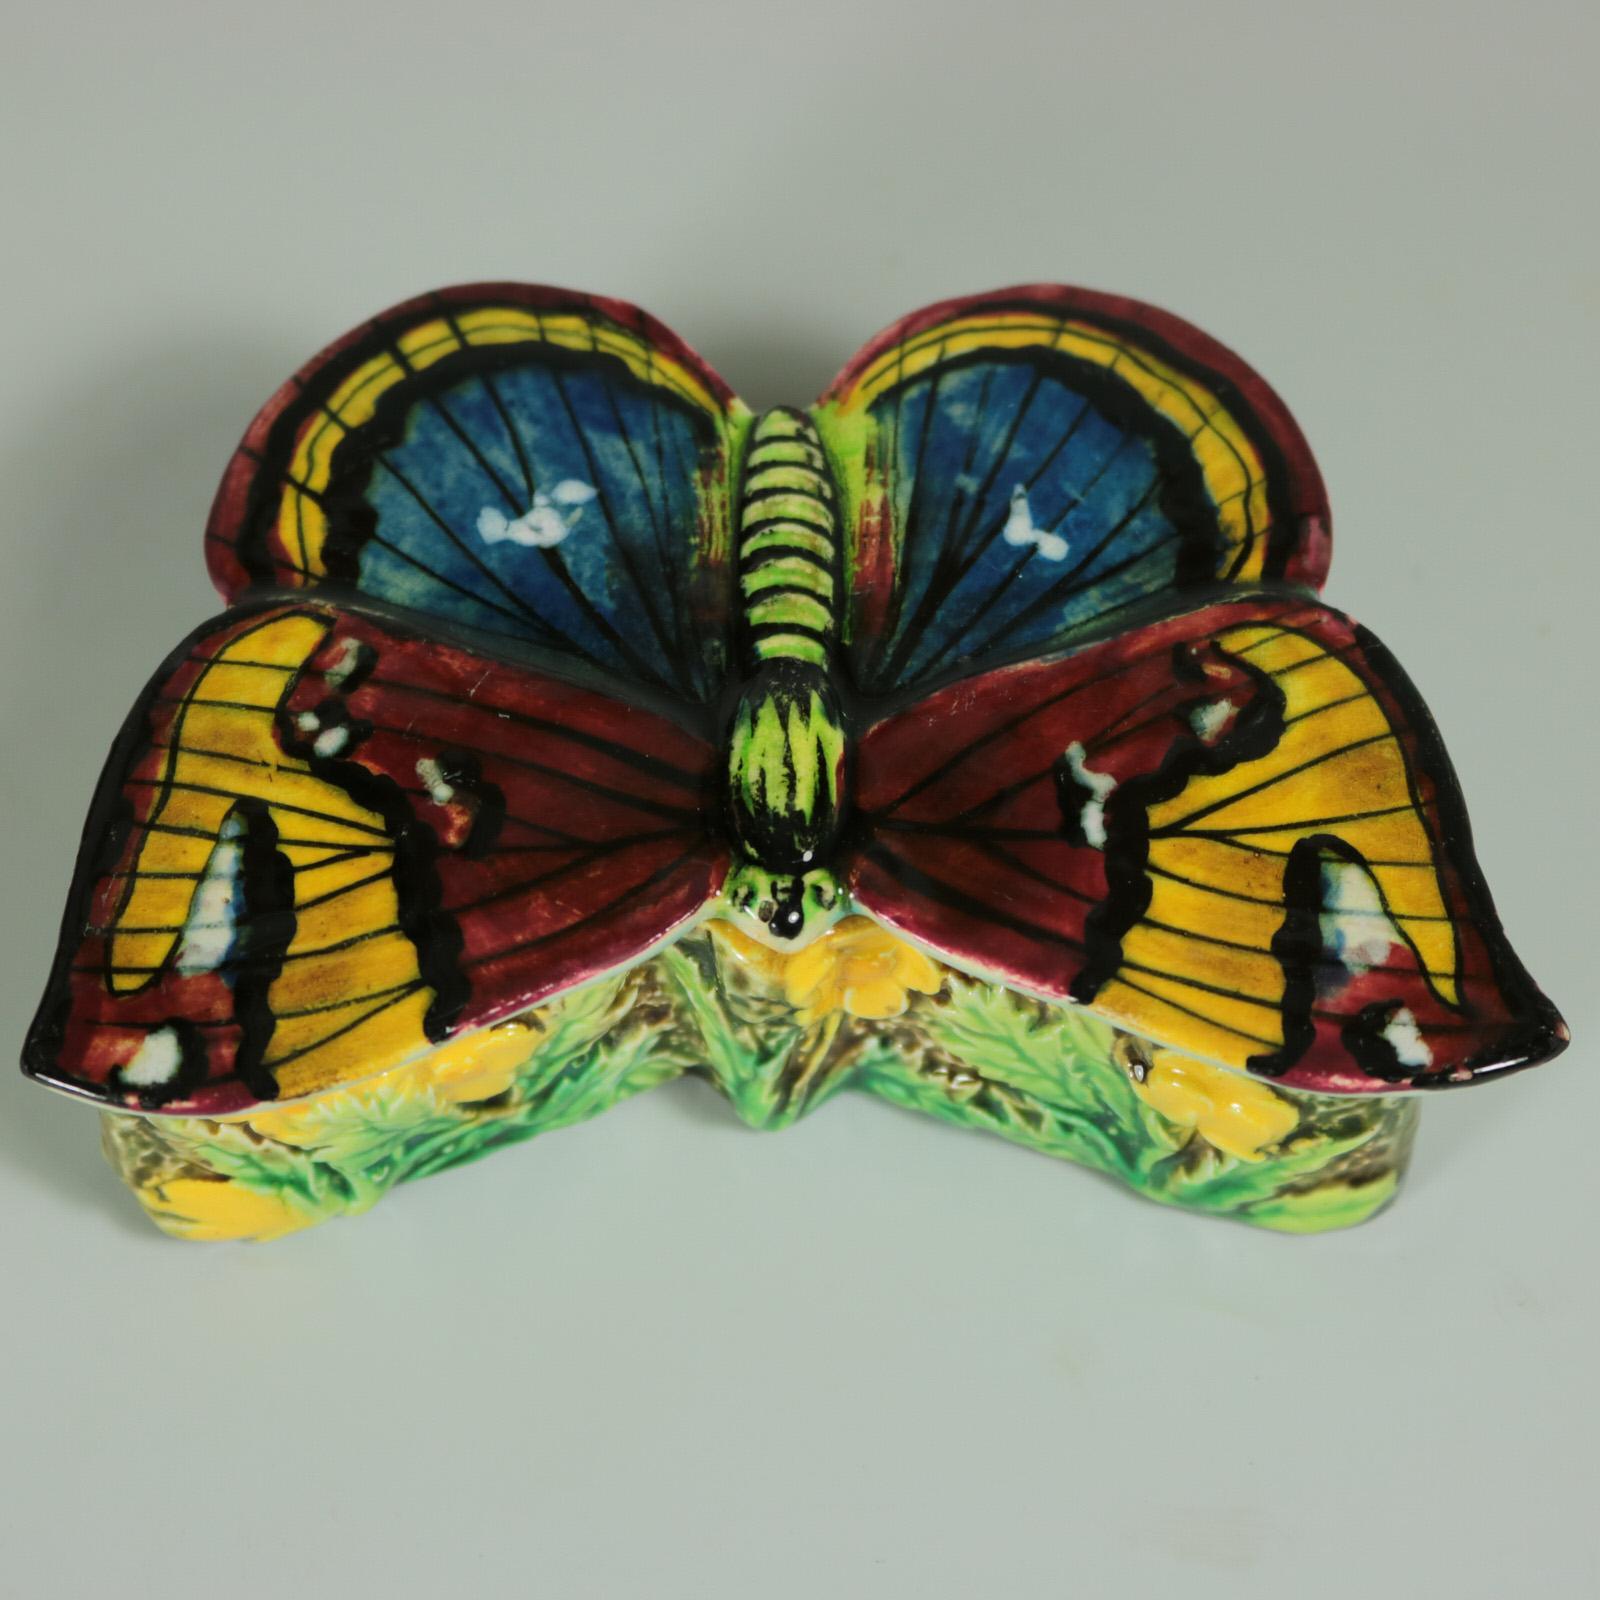 George Jones Majolica match box which features a butterfly forming the removable lid. The base is embellished with buttercups around the sides. Coloration: scarlet, yellow, blue, are predominant. English diamond registration mark for the date